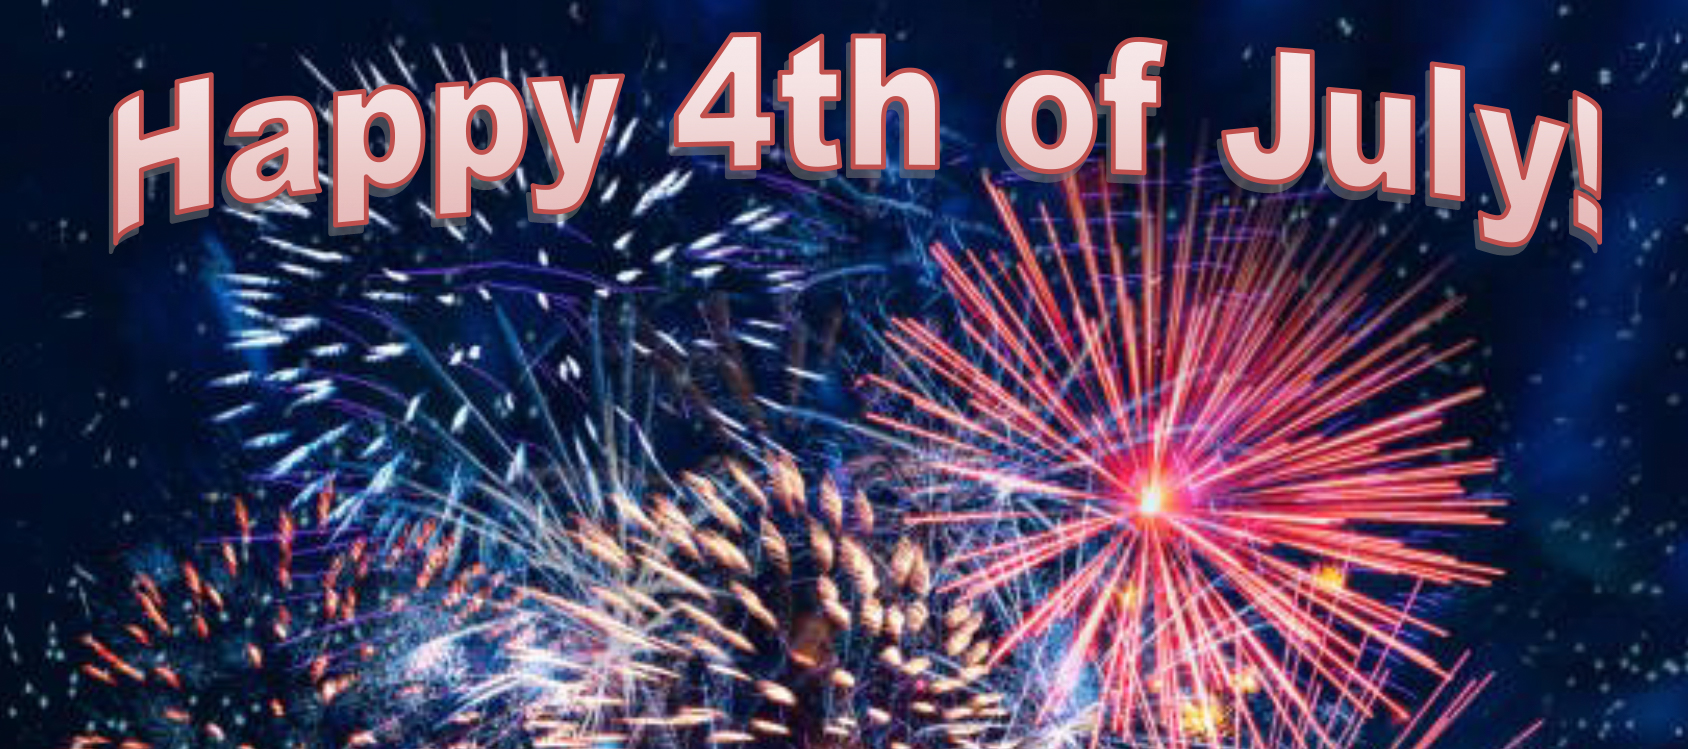 “Safe and Sane” Fireworks Safety Information and Tips for the 4th of